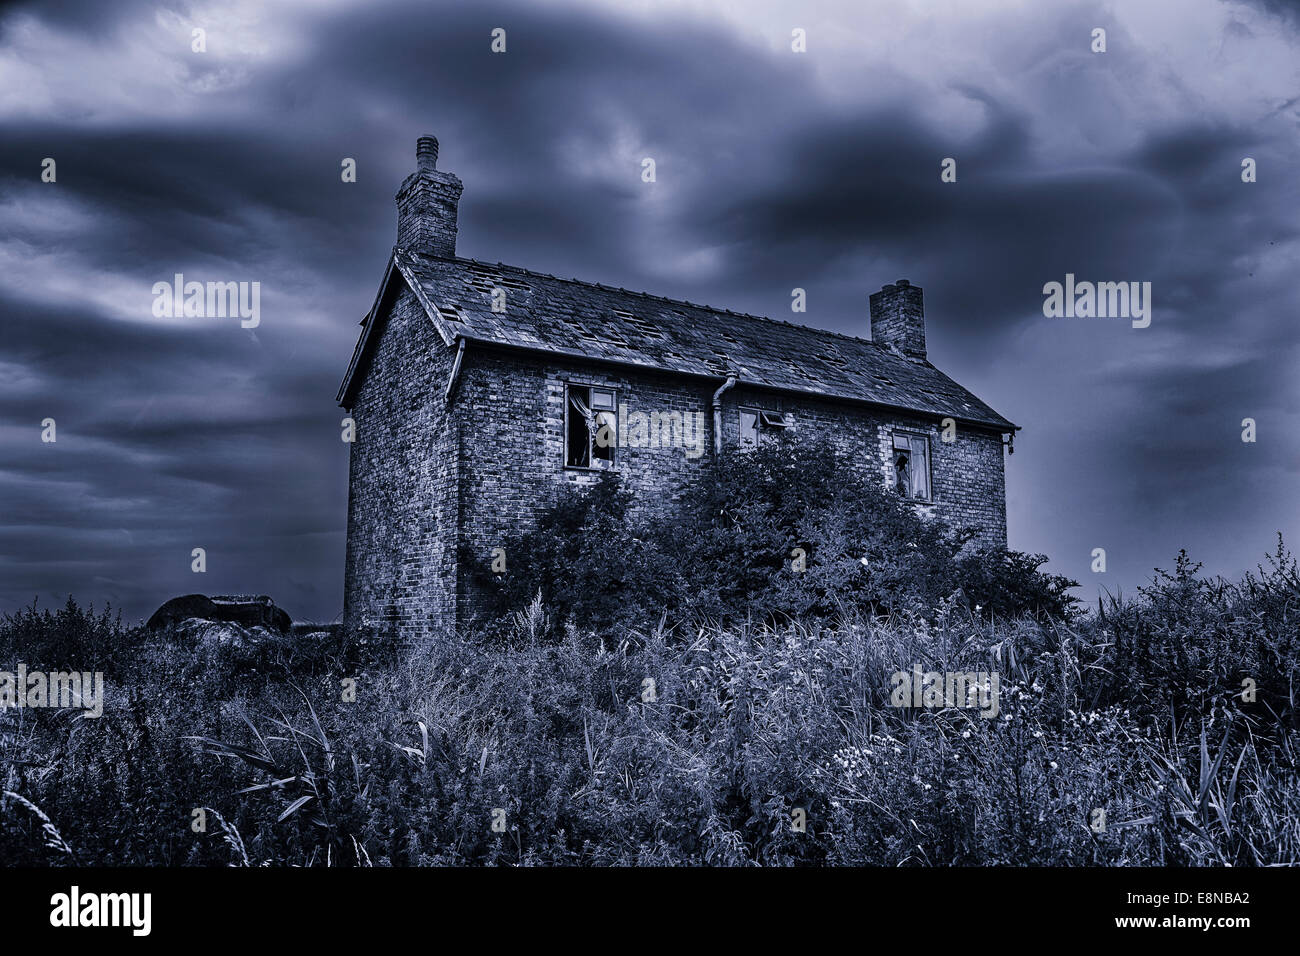 Spooky, haunted, derelict house with broken windows under a stormy sky. Black and white with a blue tint effect. Stock Photo